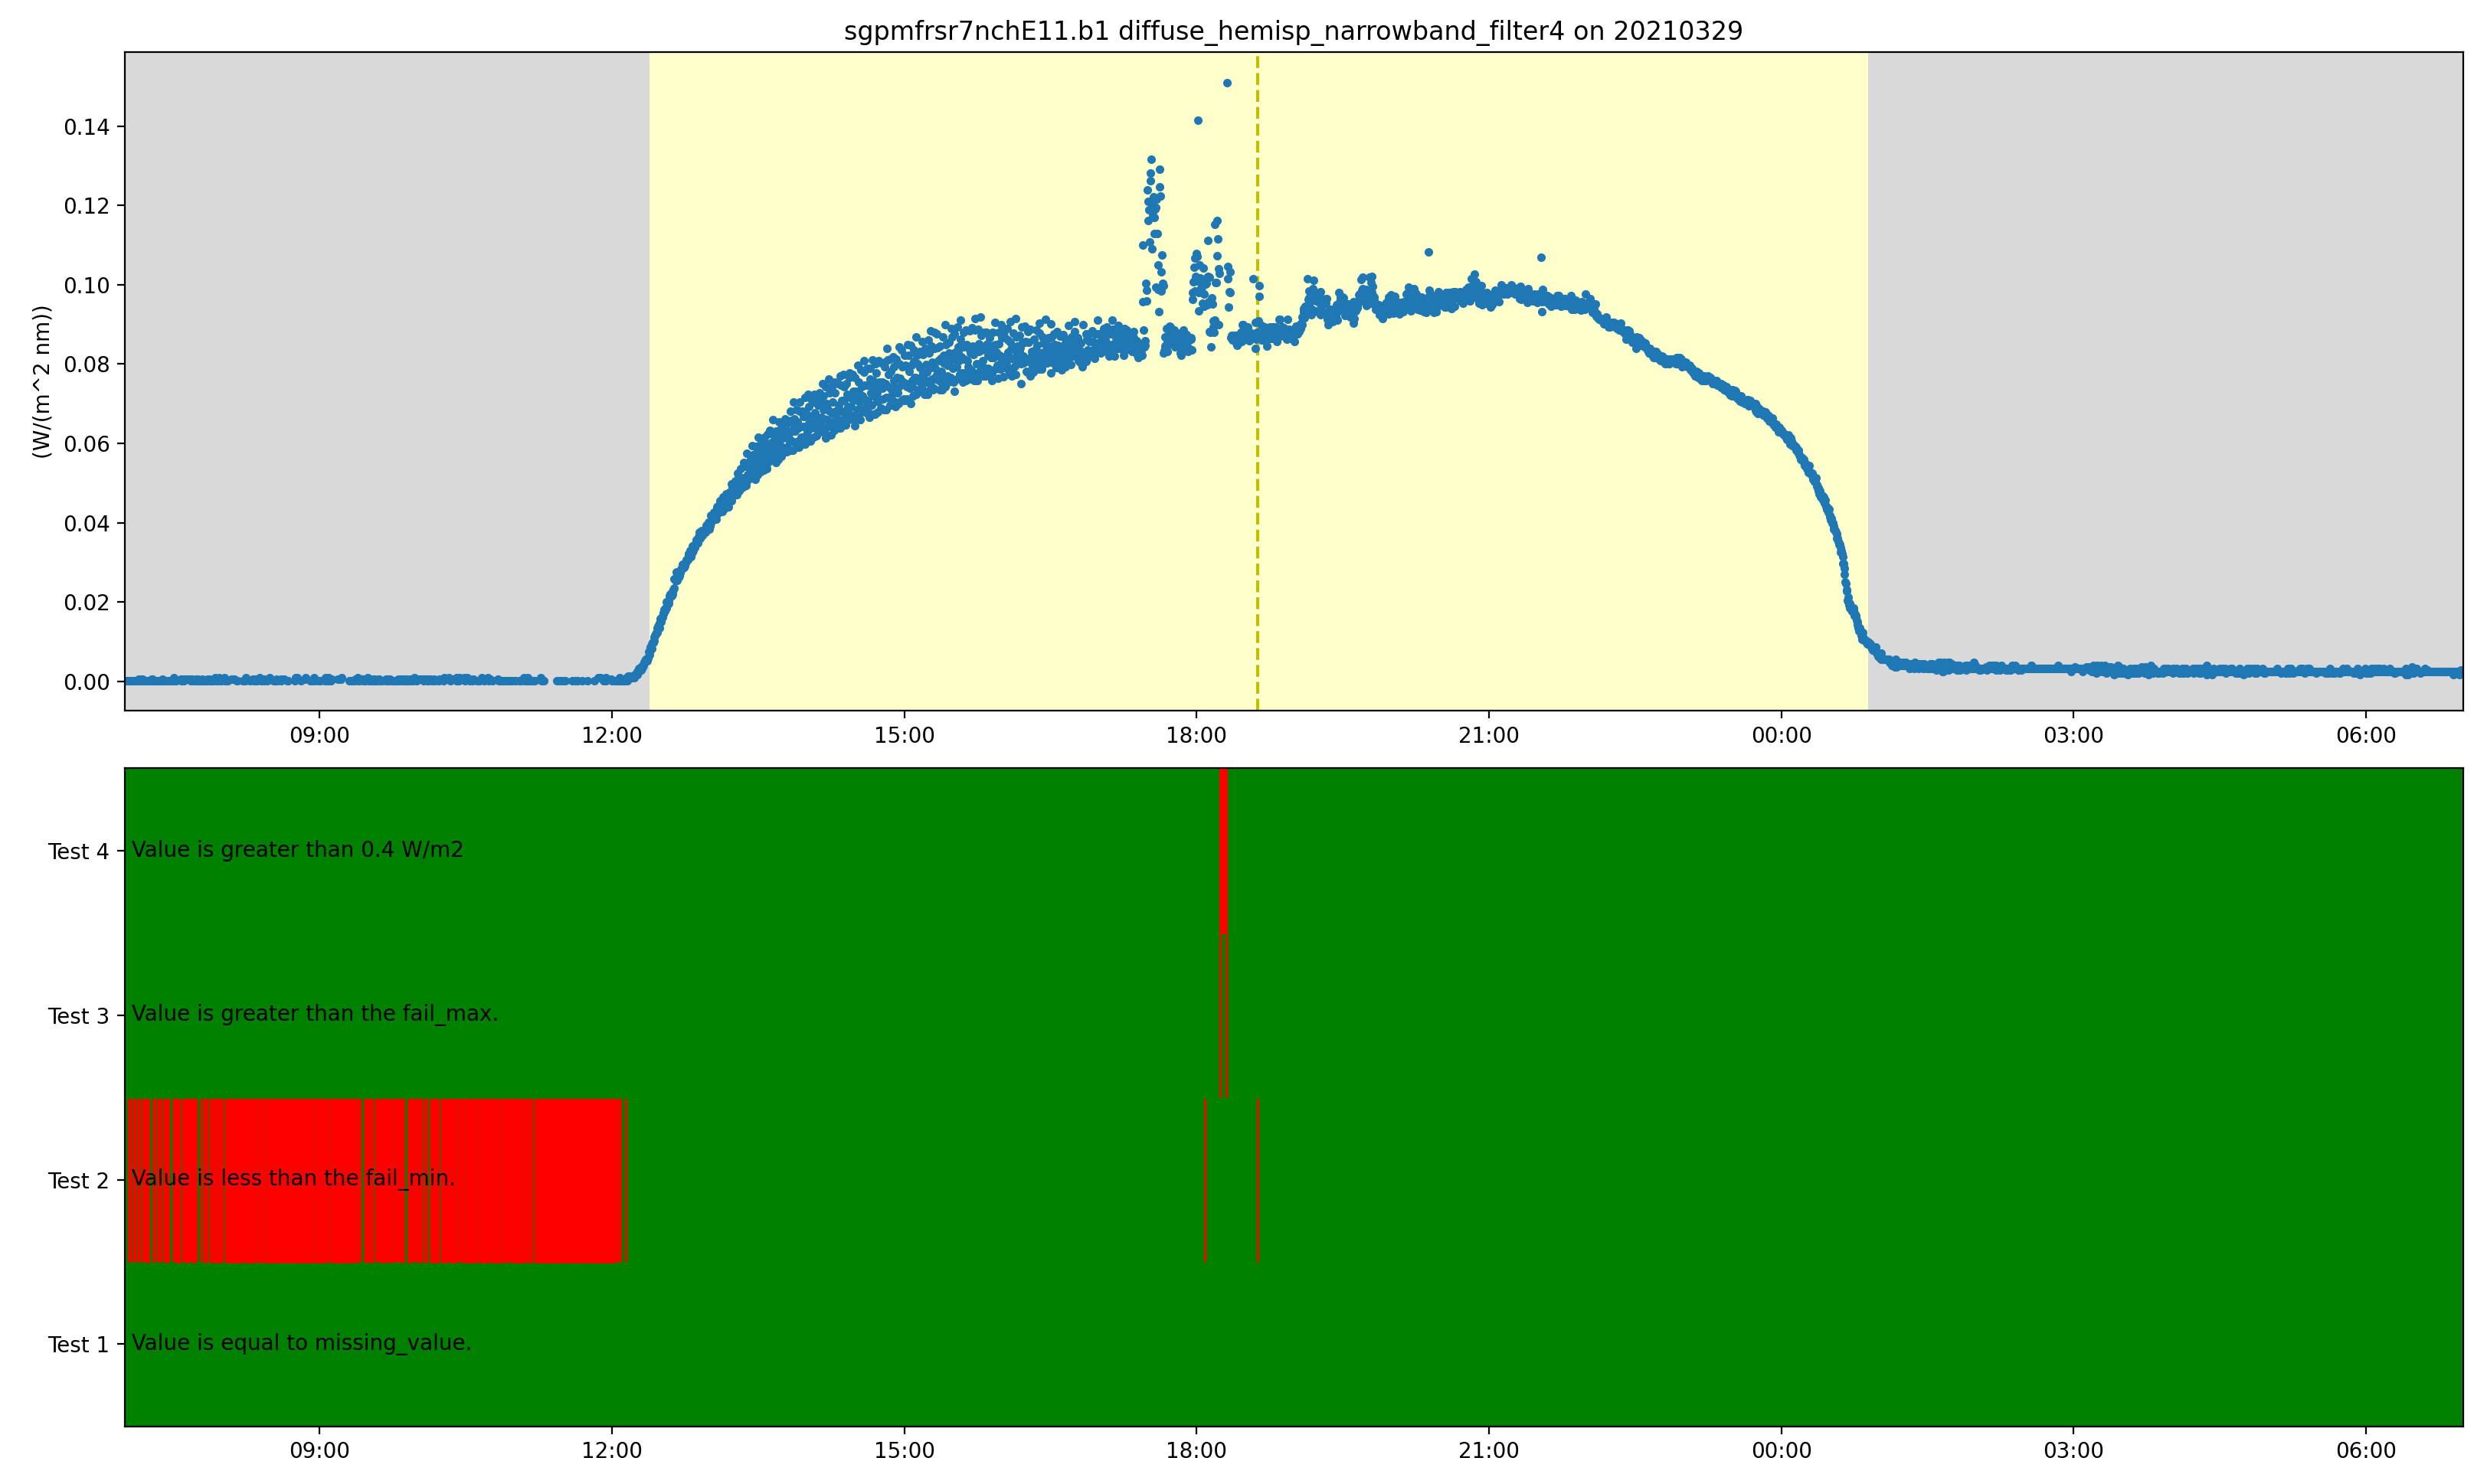 A stricter maximum limit of 0.4 W/m2 is applied to get a view of the usual irradiance profile.